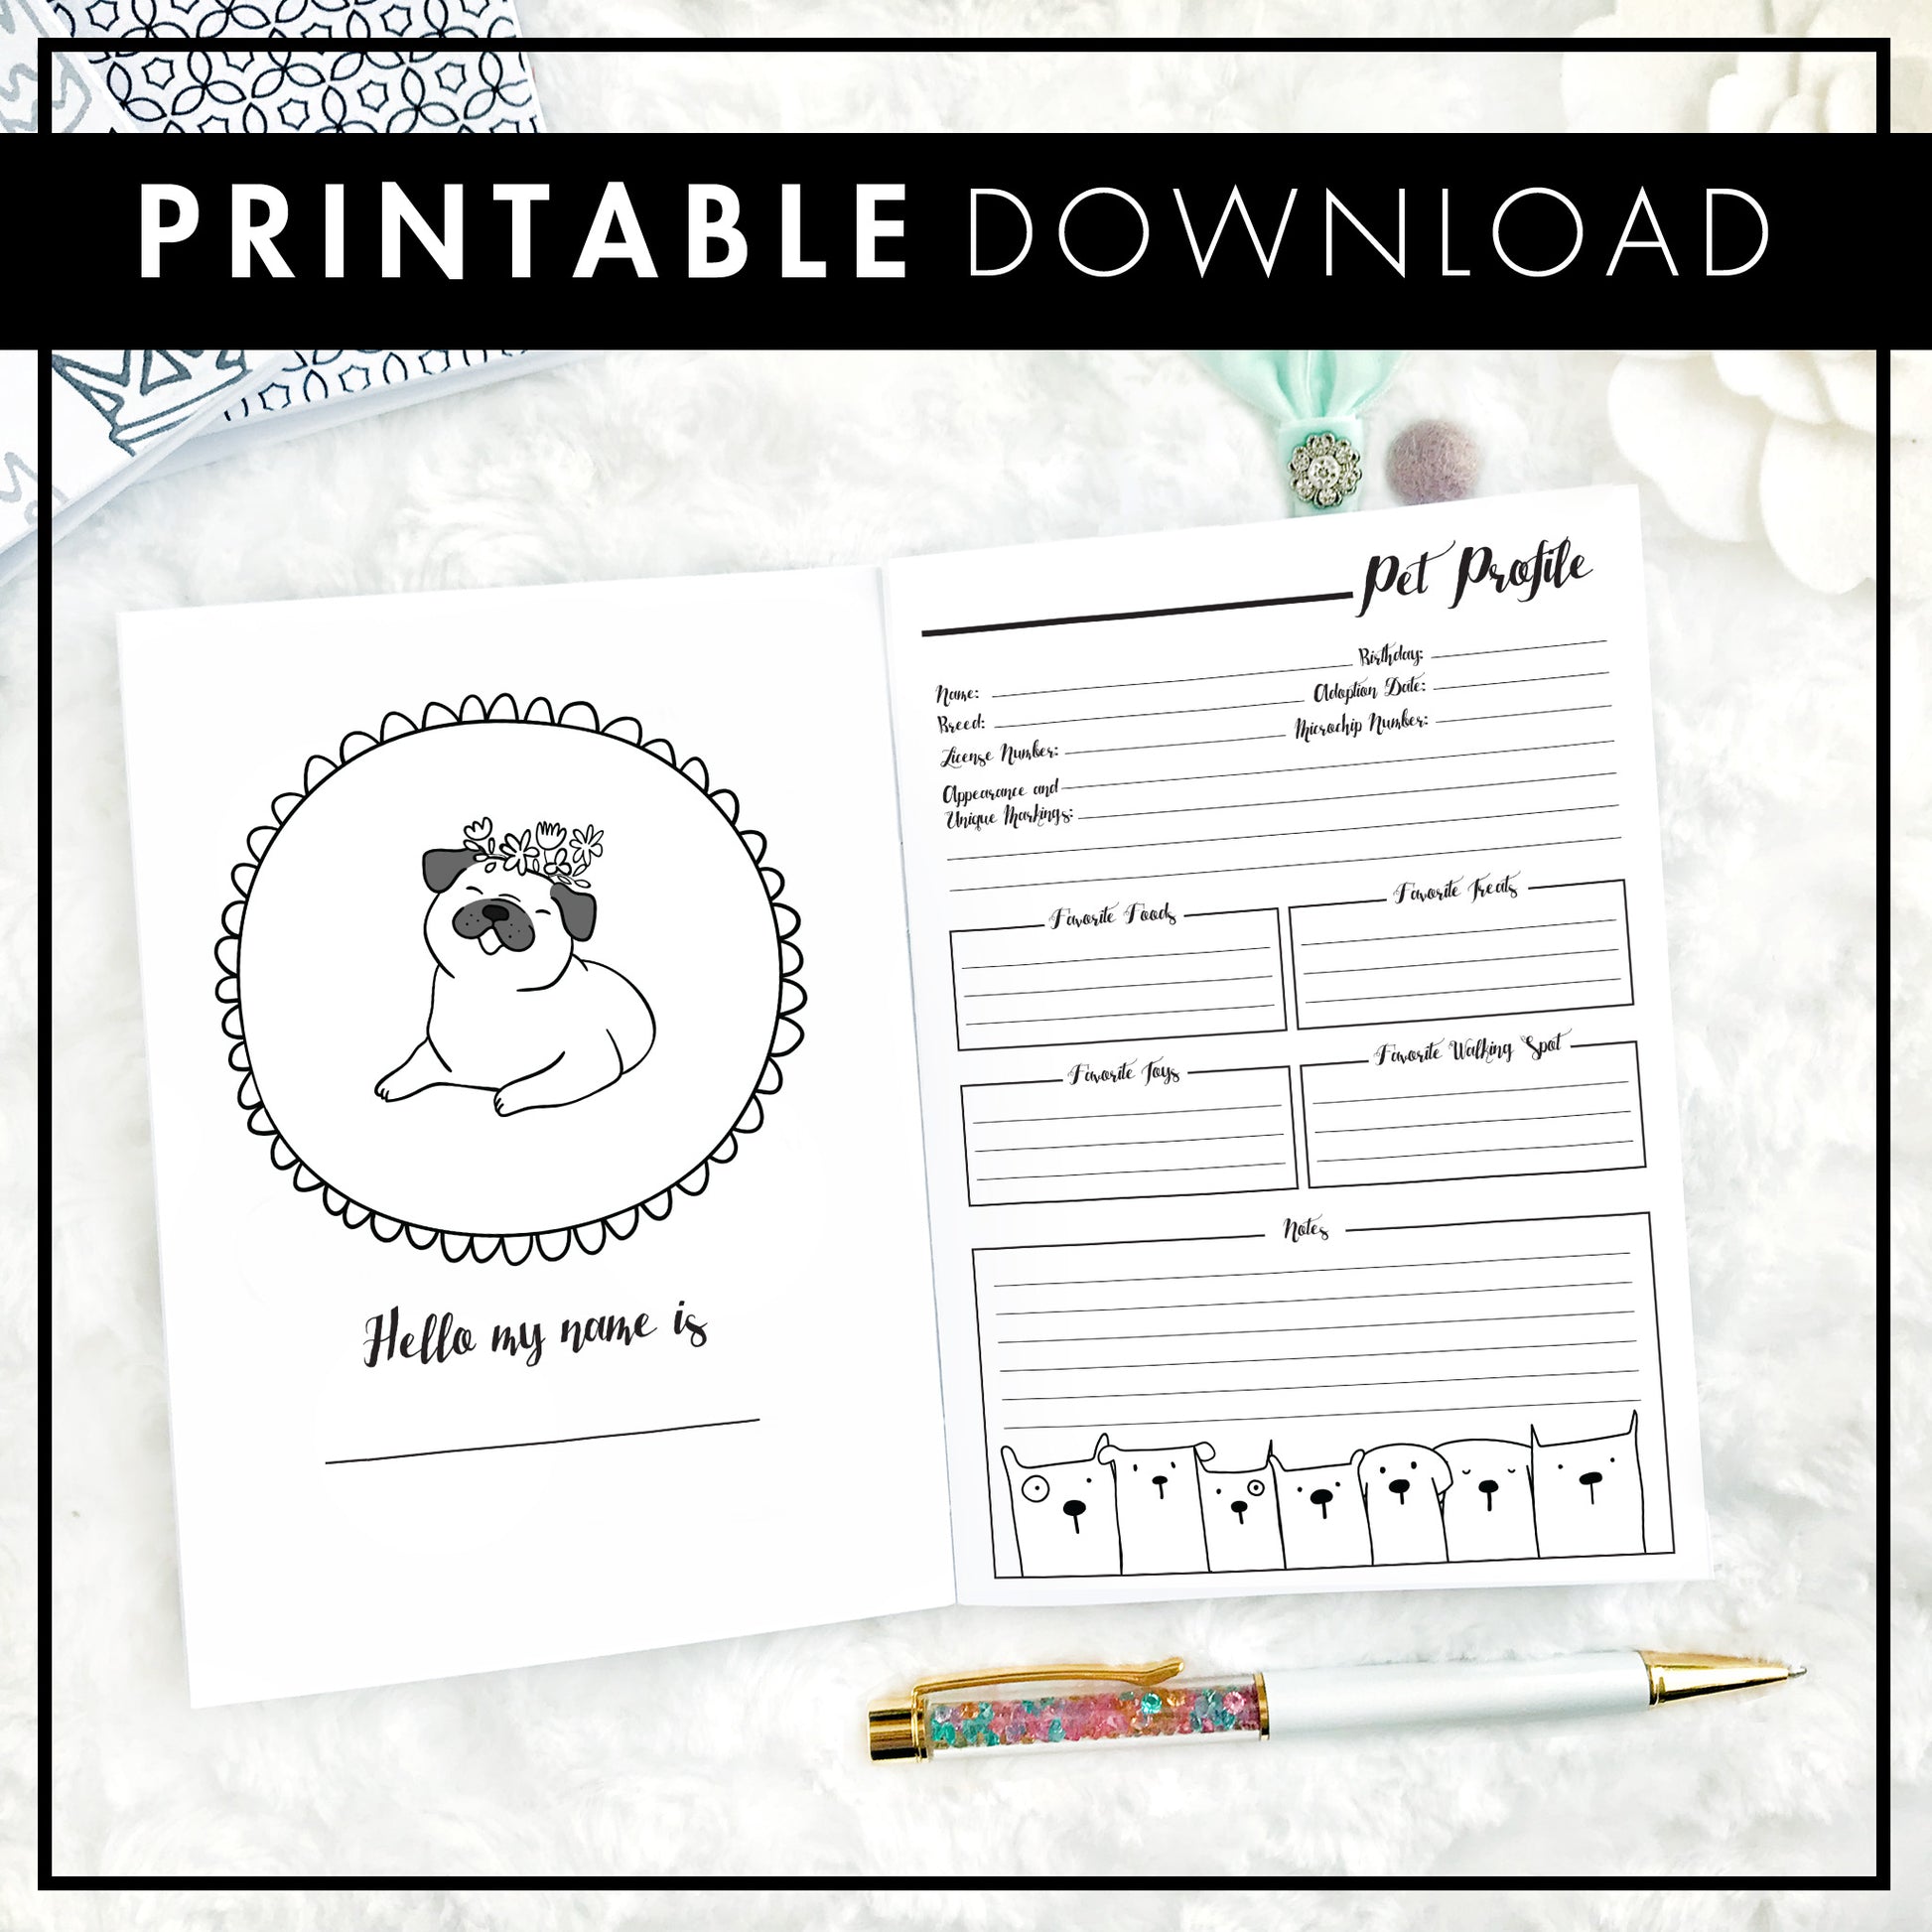 Printable Cute Cat Daily Planner Cute Cat Theme Day Planner 